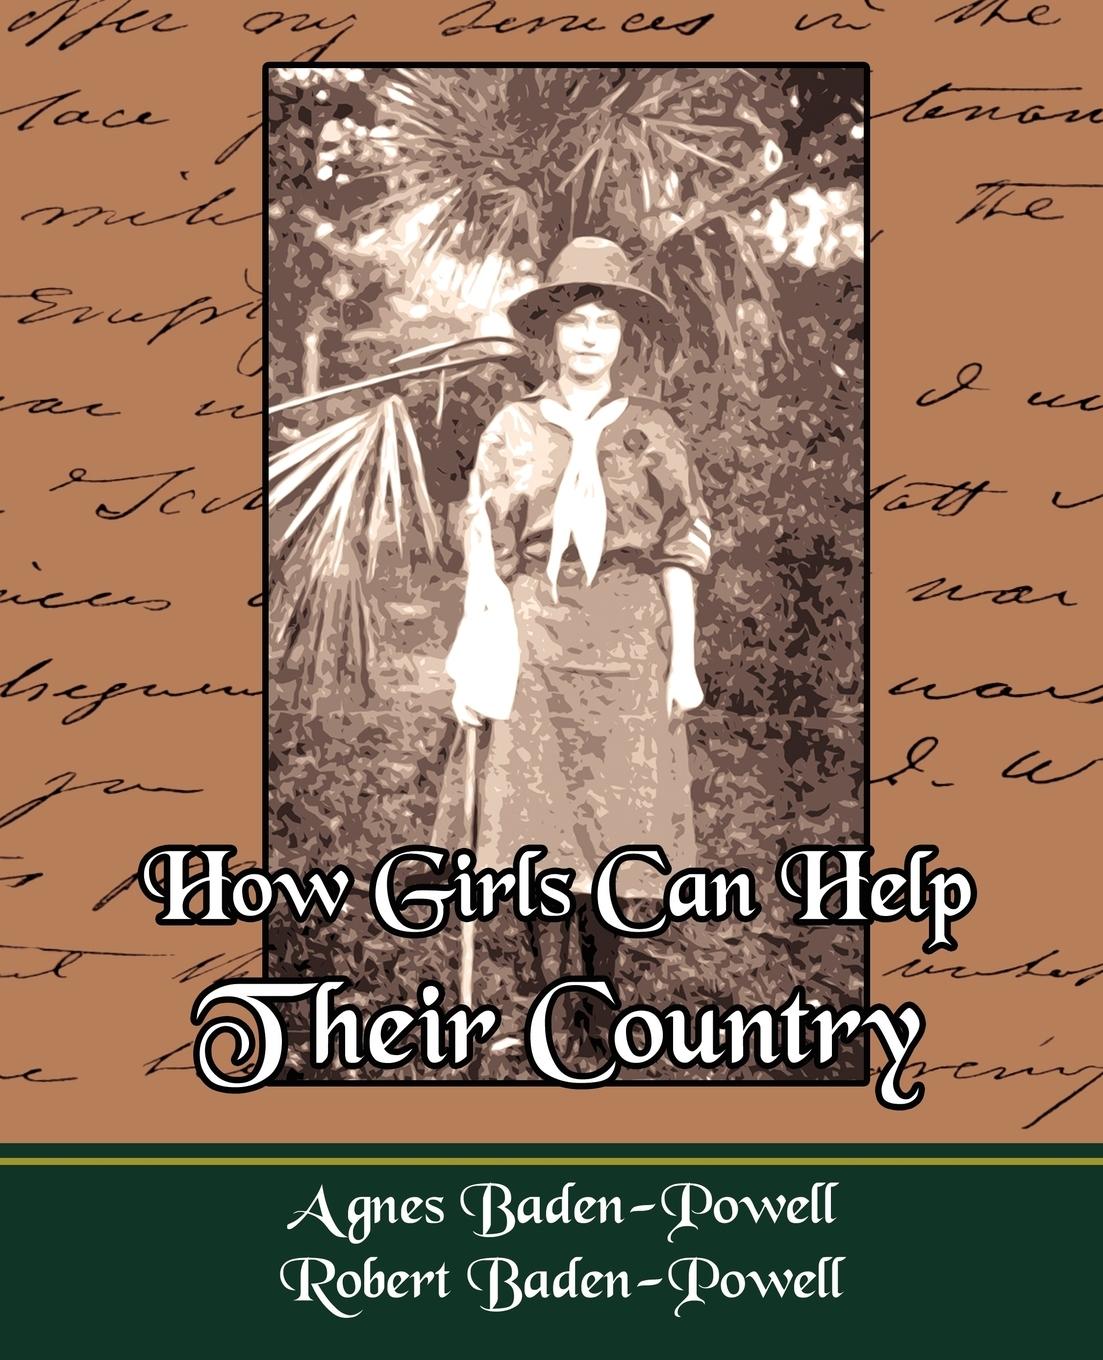 How Girls Can Help Their Country - Agnes Baden-Powell|Agnes Baden-Powell, Baden-Powell|Baden-Powell, Agnes